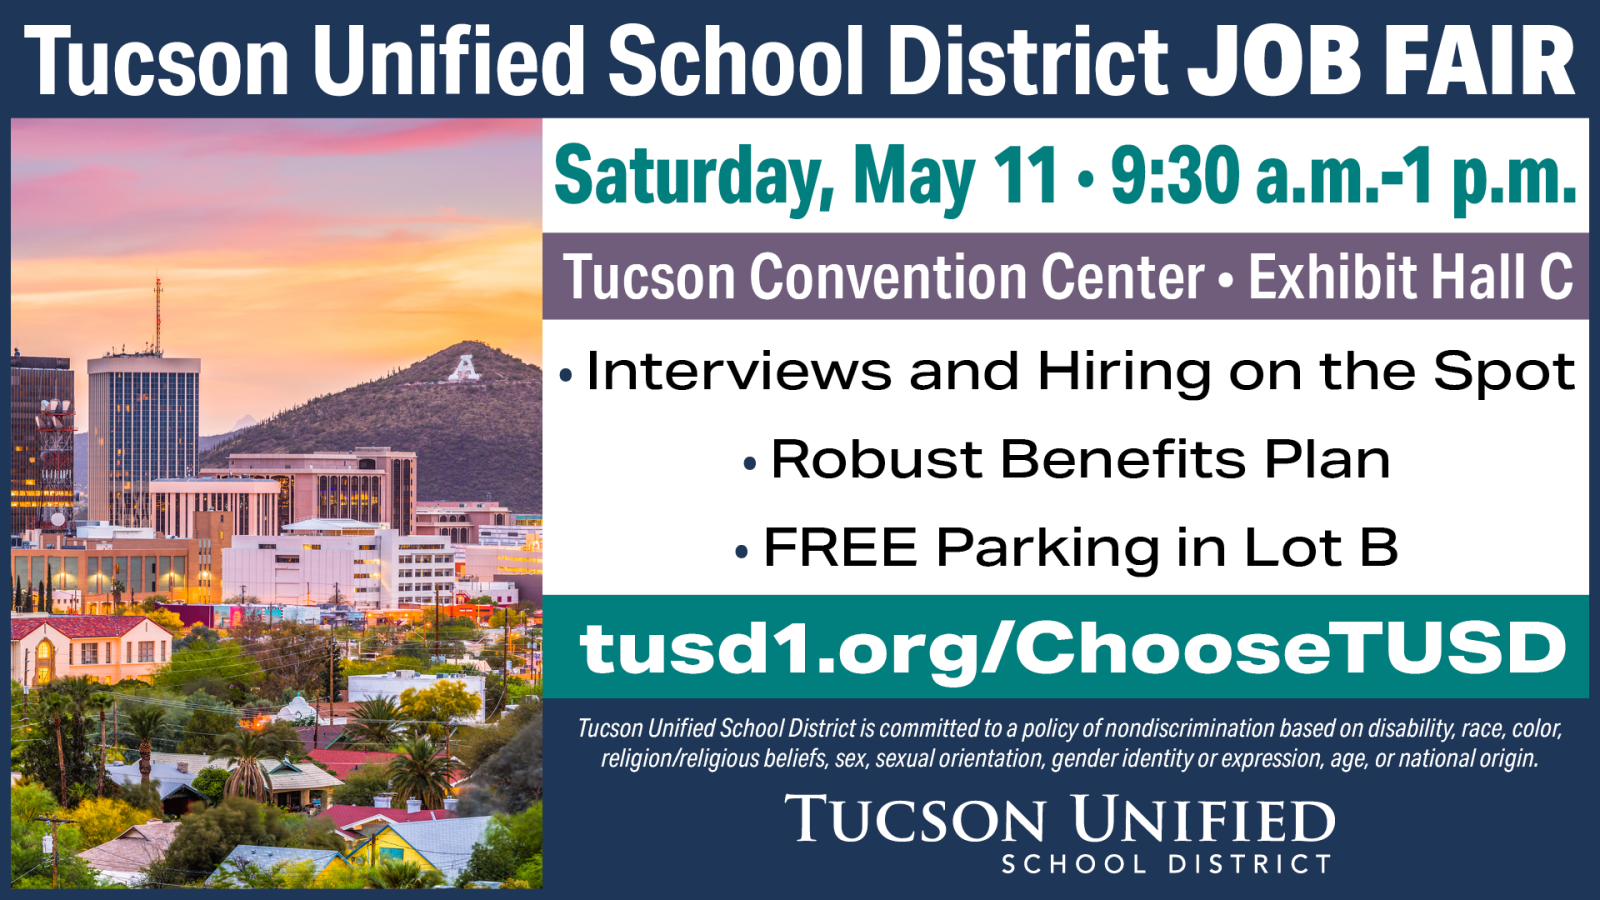 Join us on Saturday May 11 from 9:30 am - 1:00 pm at the Tucson Convention Center Exhibit Hall C (260 S. Church Ave.) for the Ƶ Job Fair!  Interviews and Hiring on the Spot Robust Benefits Plan FREE Parking in Lot B  